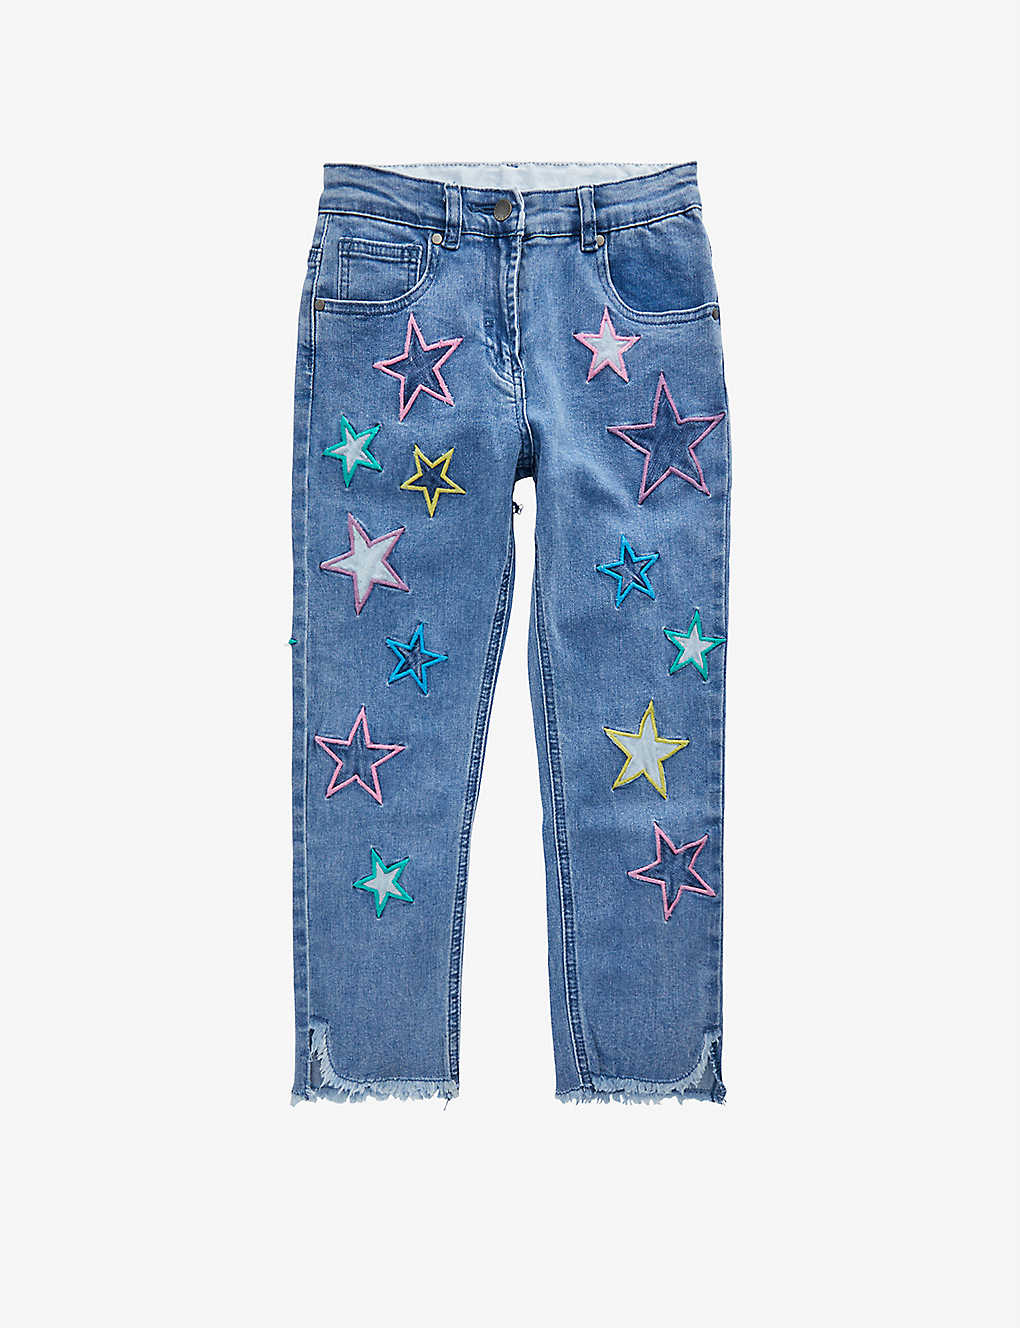 Star-print stretch-denim jeans 4-16 years Selfridges & Co Girls Clothing Jeans Stretch Jeans 